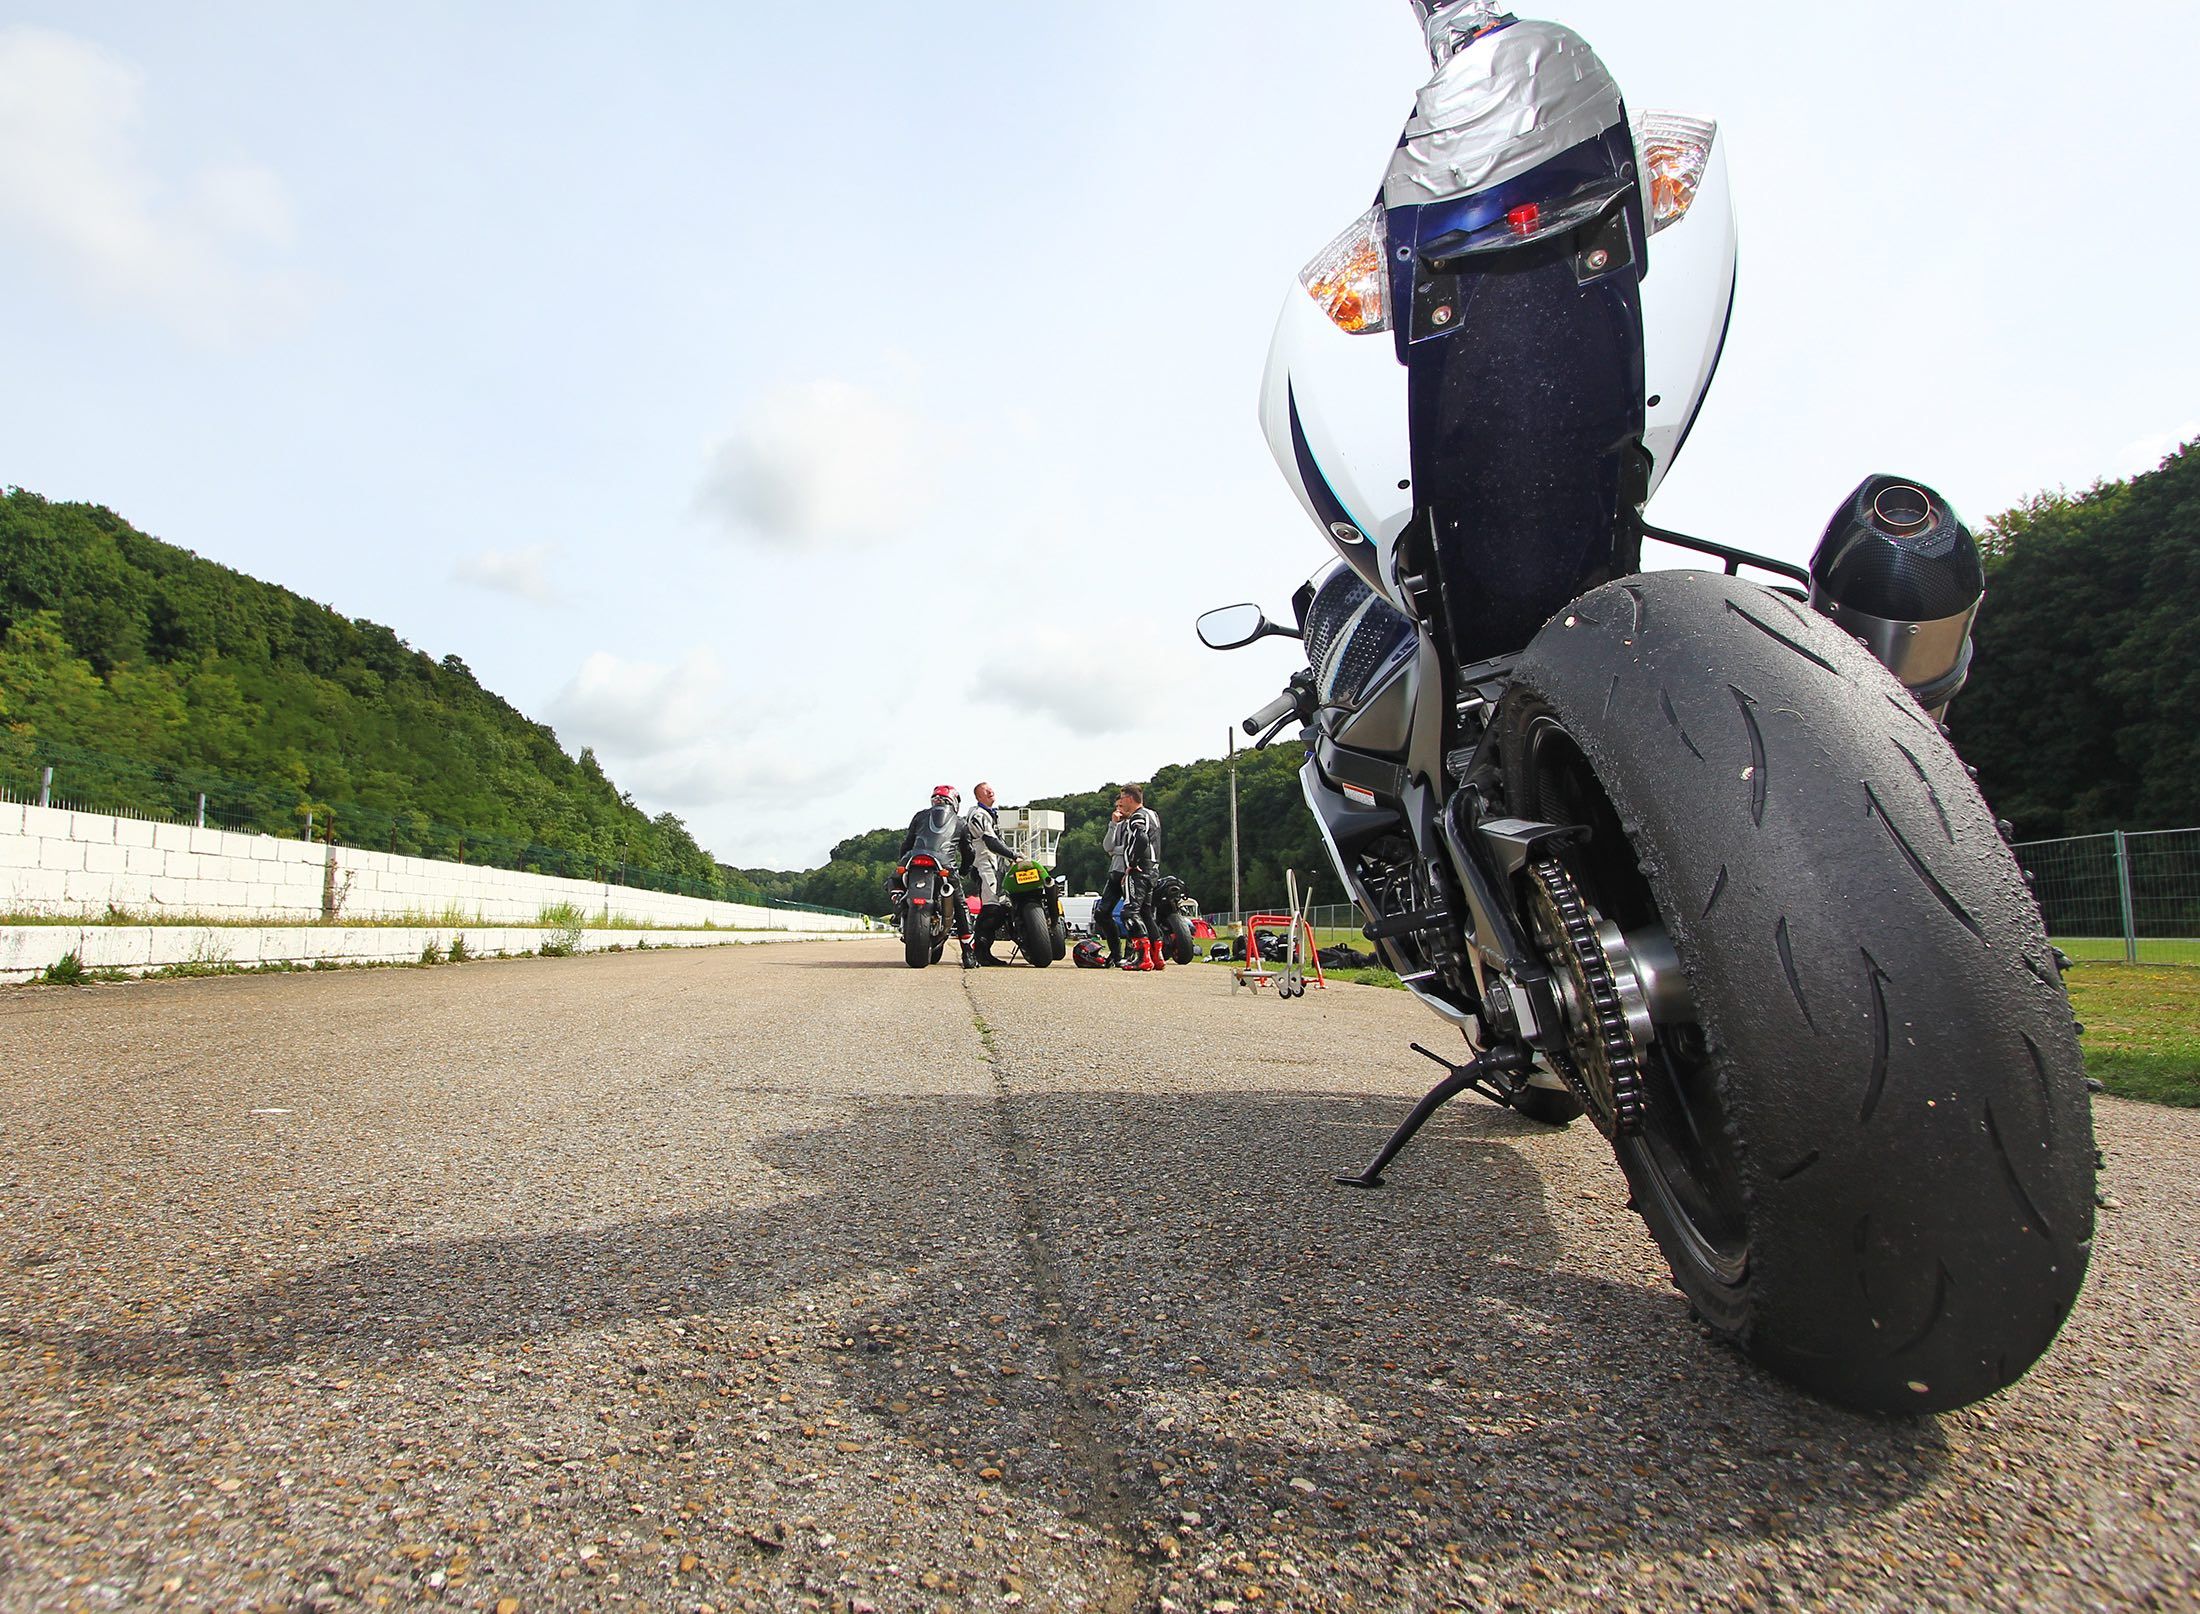 Rear view of motorcycle showing tyre wear